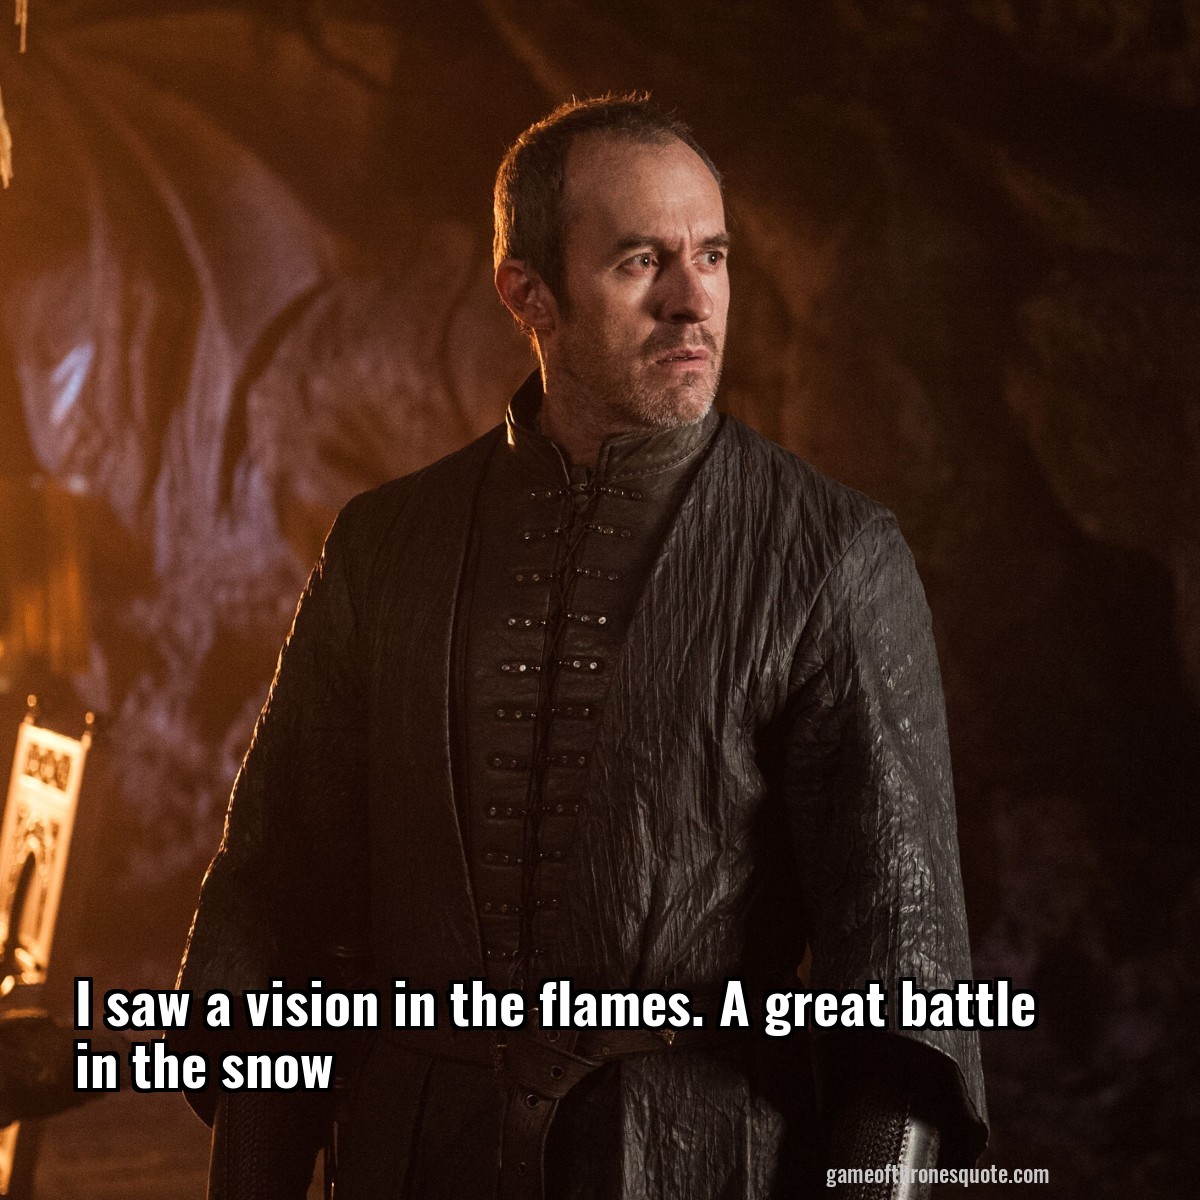 I saw a vision in the flames. A great battle in the snow